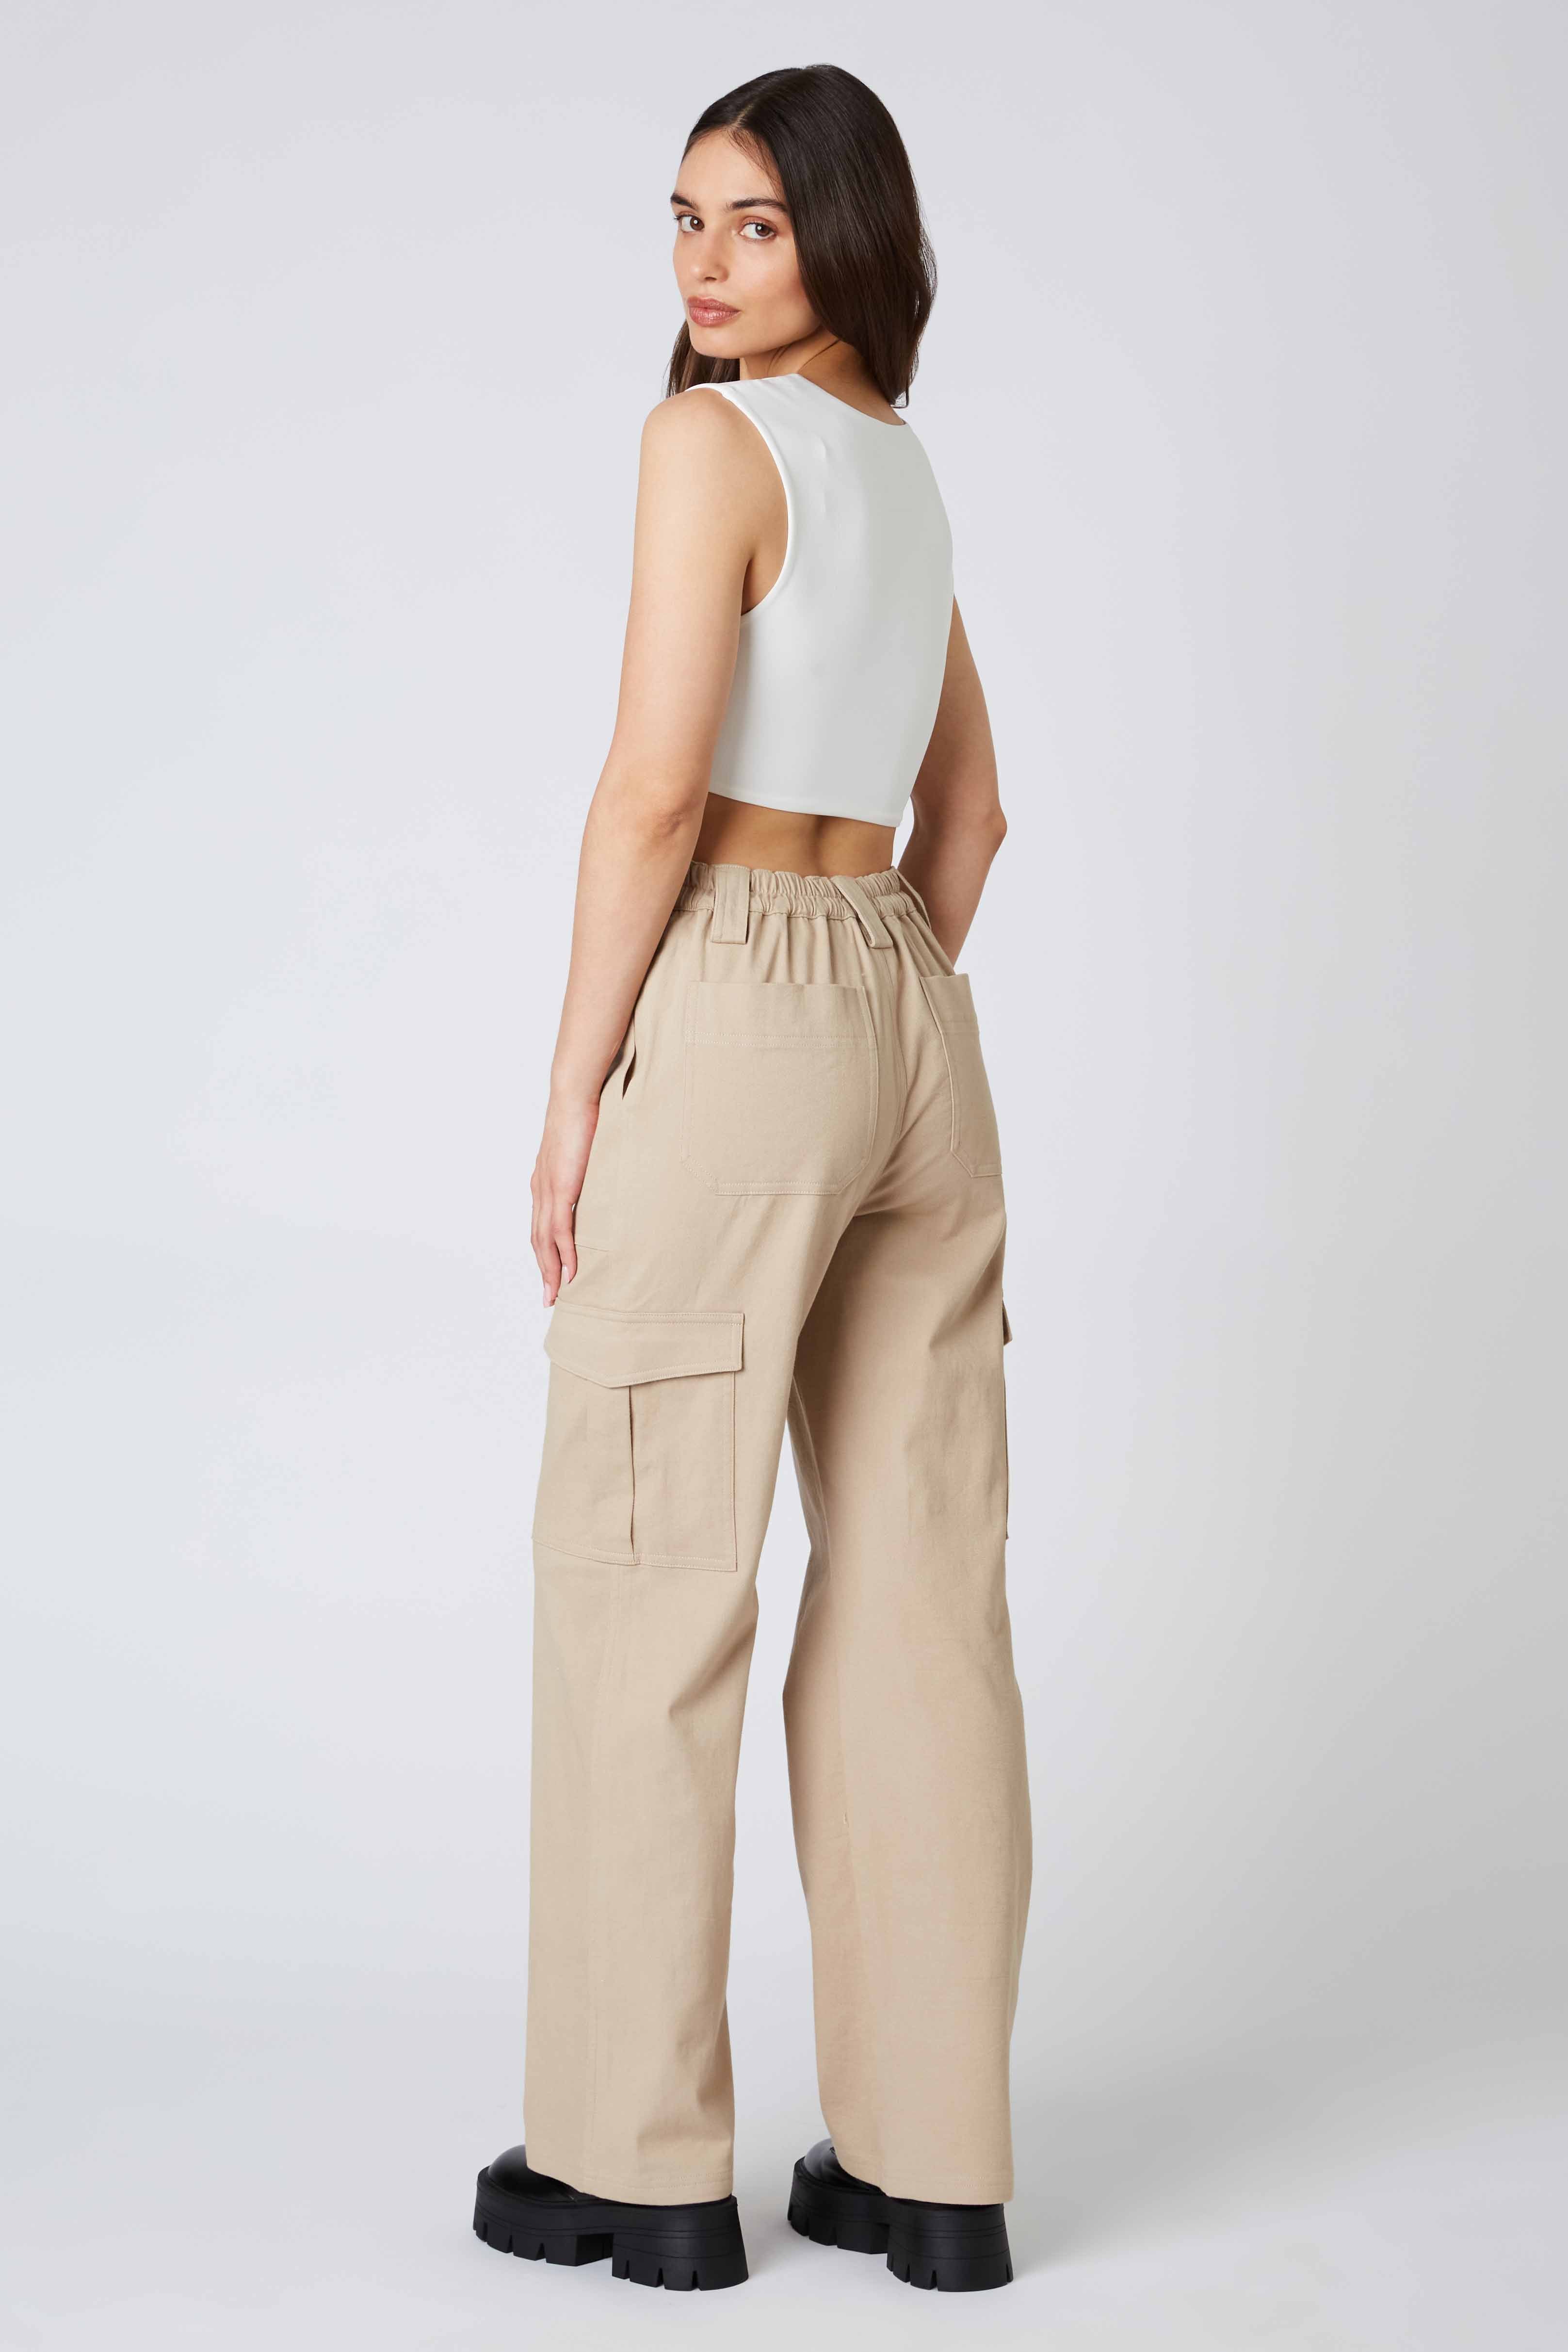 Twill Cargo Pants in Taupe Back View